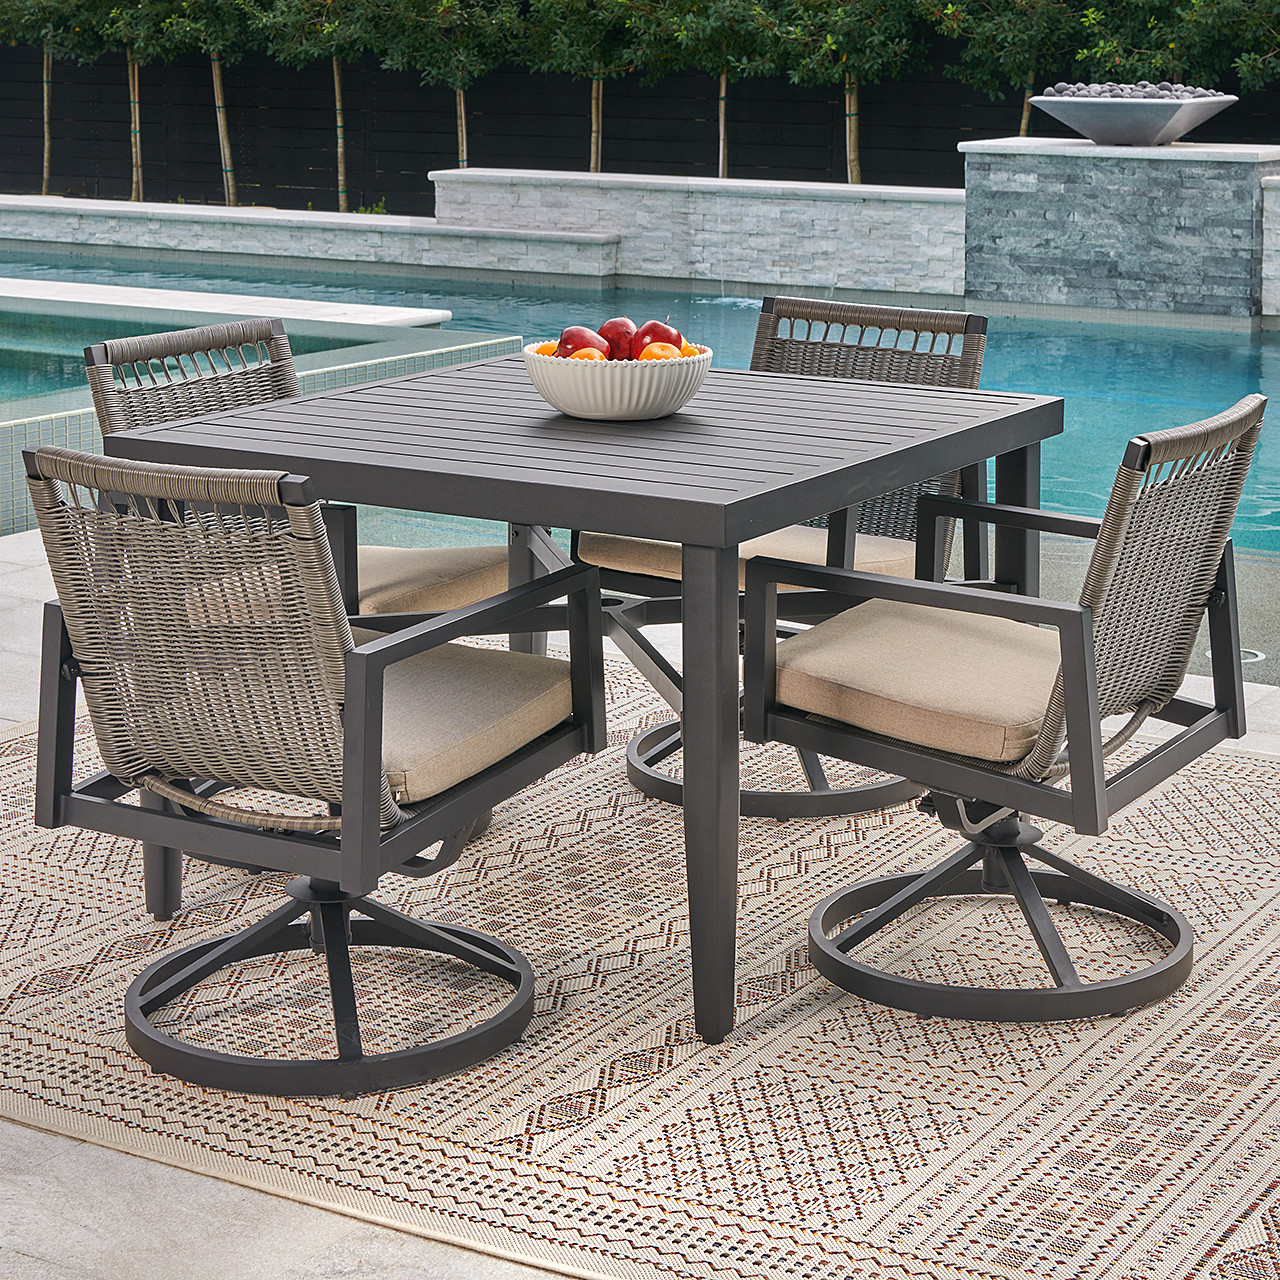 Tulum Husk Midnight Aluminum with Cushions 5 Piece Swivel Dining Set + 43 in. Sq. Dining Table